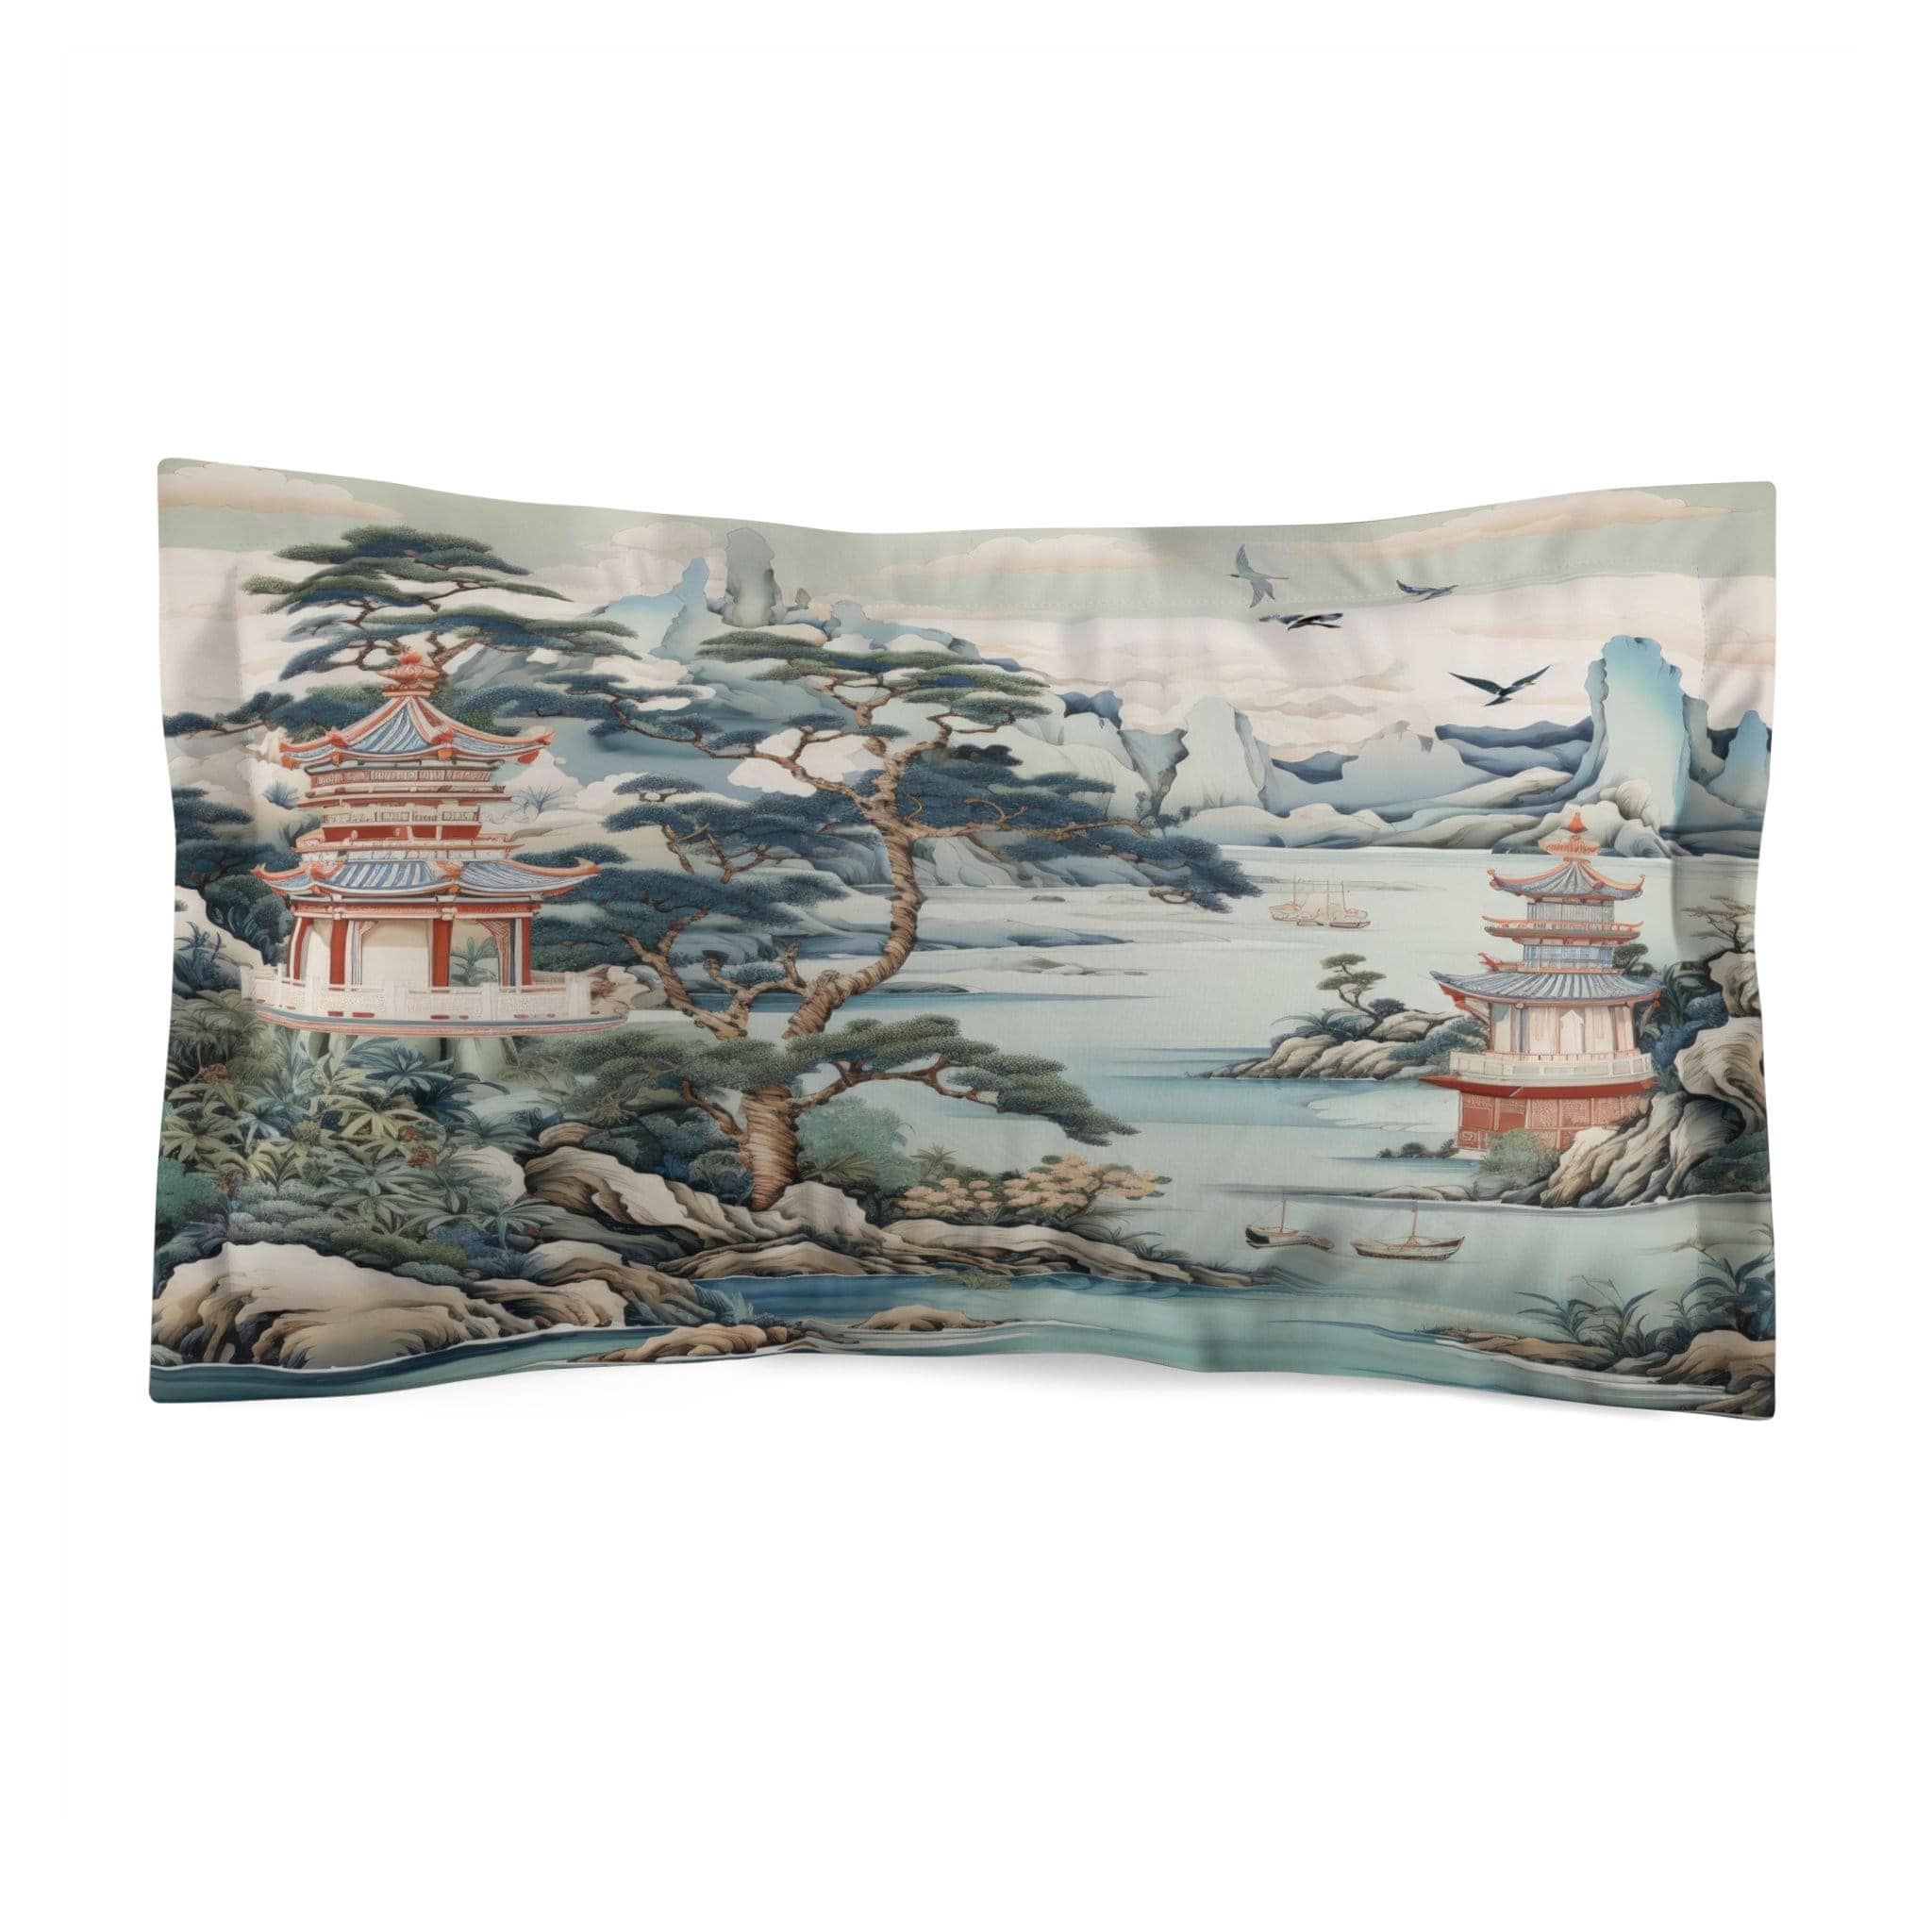 Kate McEnroe New York Chinoiserie Pagoda Landscape Floral Pillow Sham, Country Farmhouse Grandmillenial Bedroom Pillows, Rustic Chic Bedroom Decor - 121281023Pillow Shams17795159820759568696